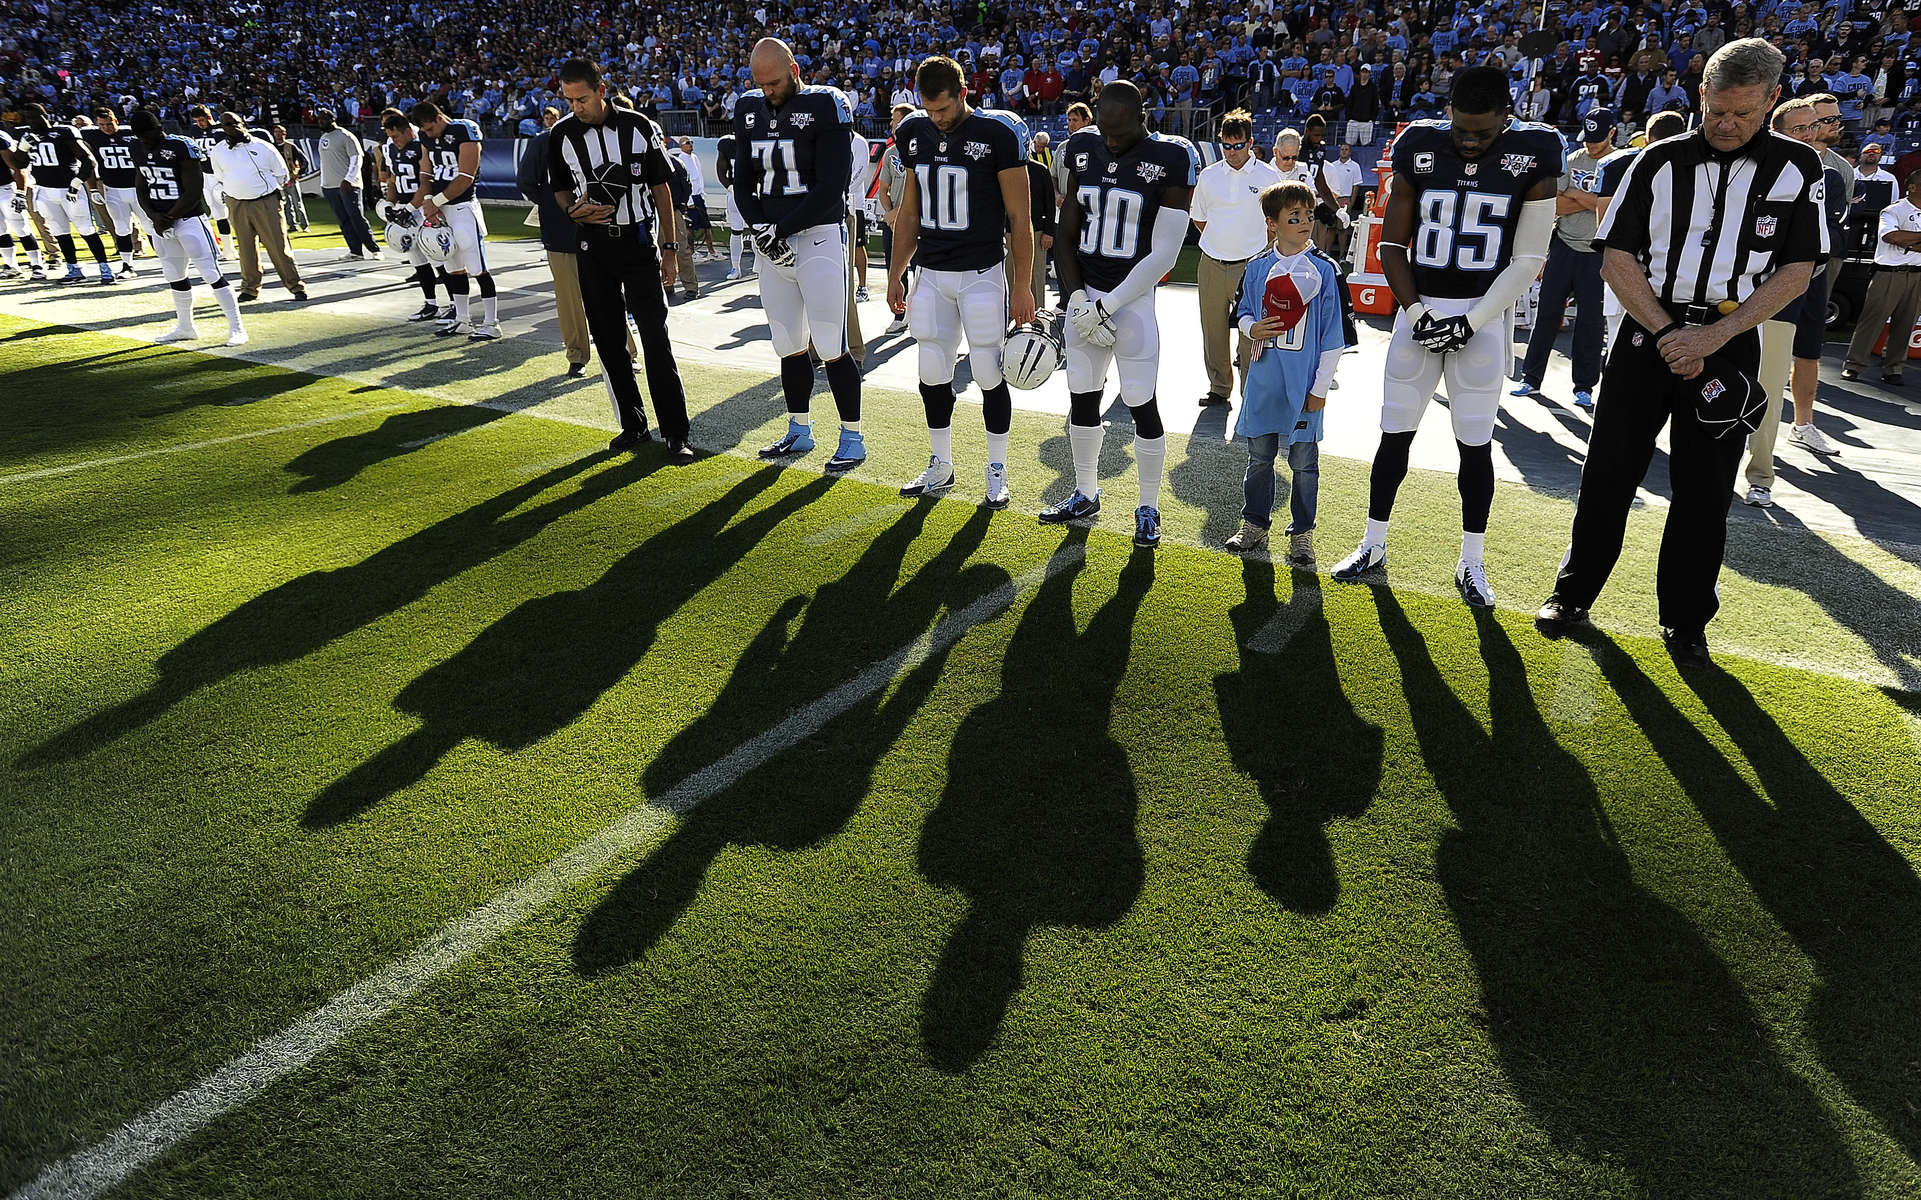 Tennessee Titans players take part in a moment of silence in tribute to the late Bum Phillips before an NFL football game against the San Francisco 49ers on Oct. 20, 2013, in Nashville, Tenn. Phillips, the former Houston Oilers head coach, died Oct. 18, 2013. (AP Photo/ Mark Zaleski)